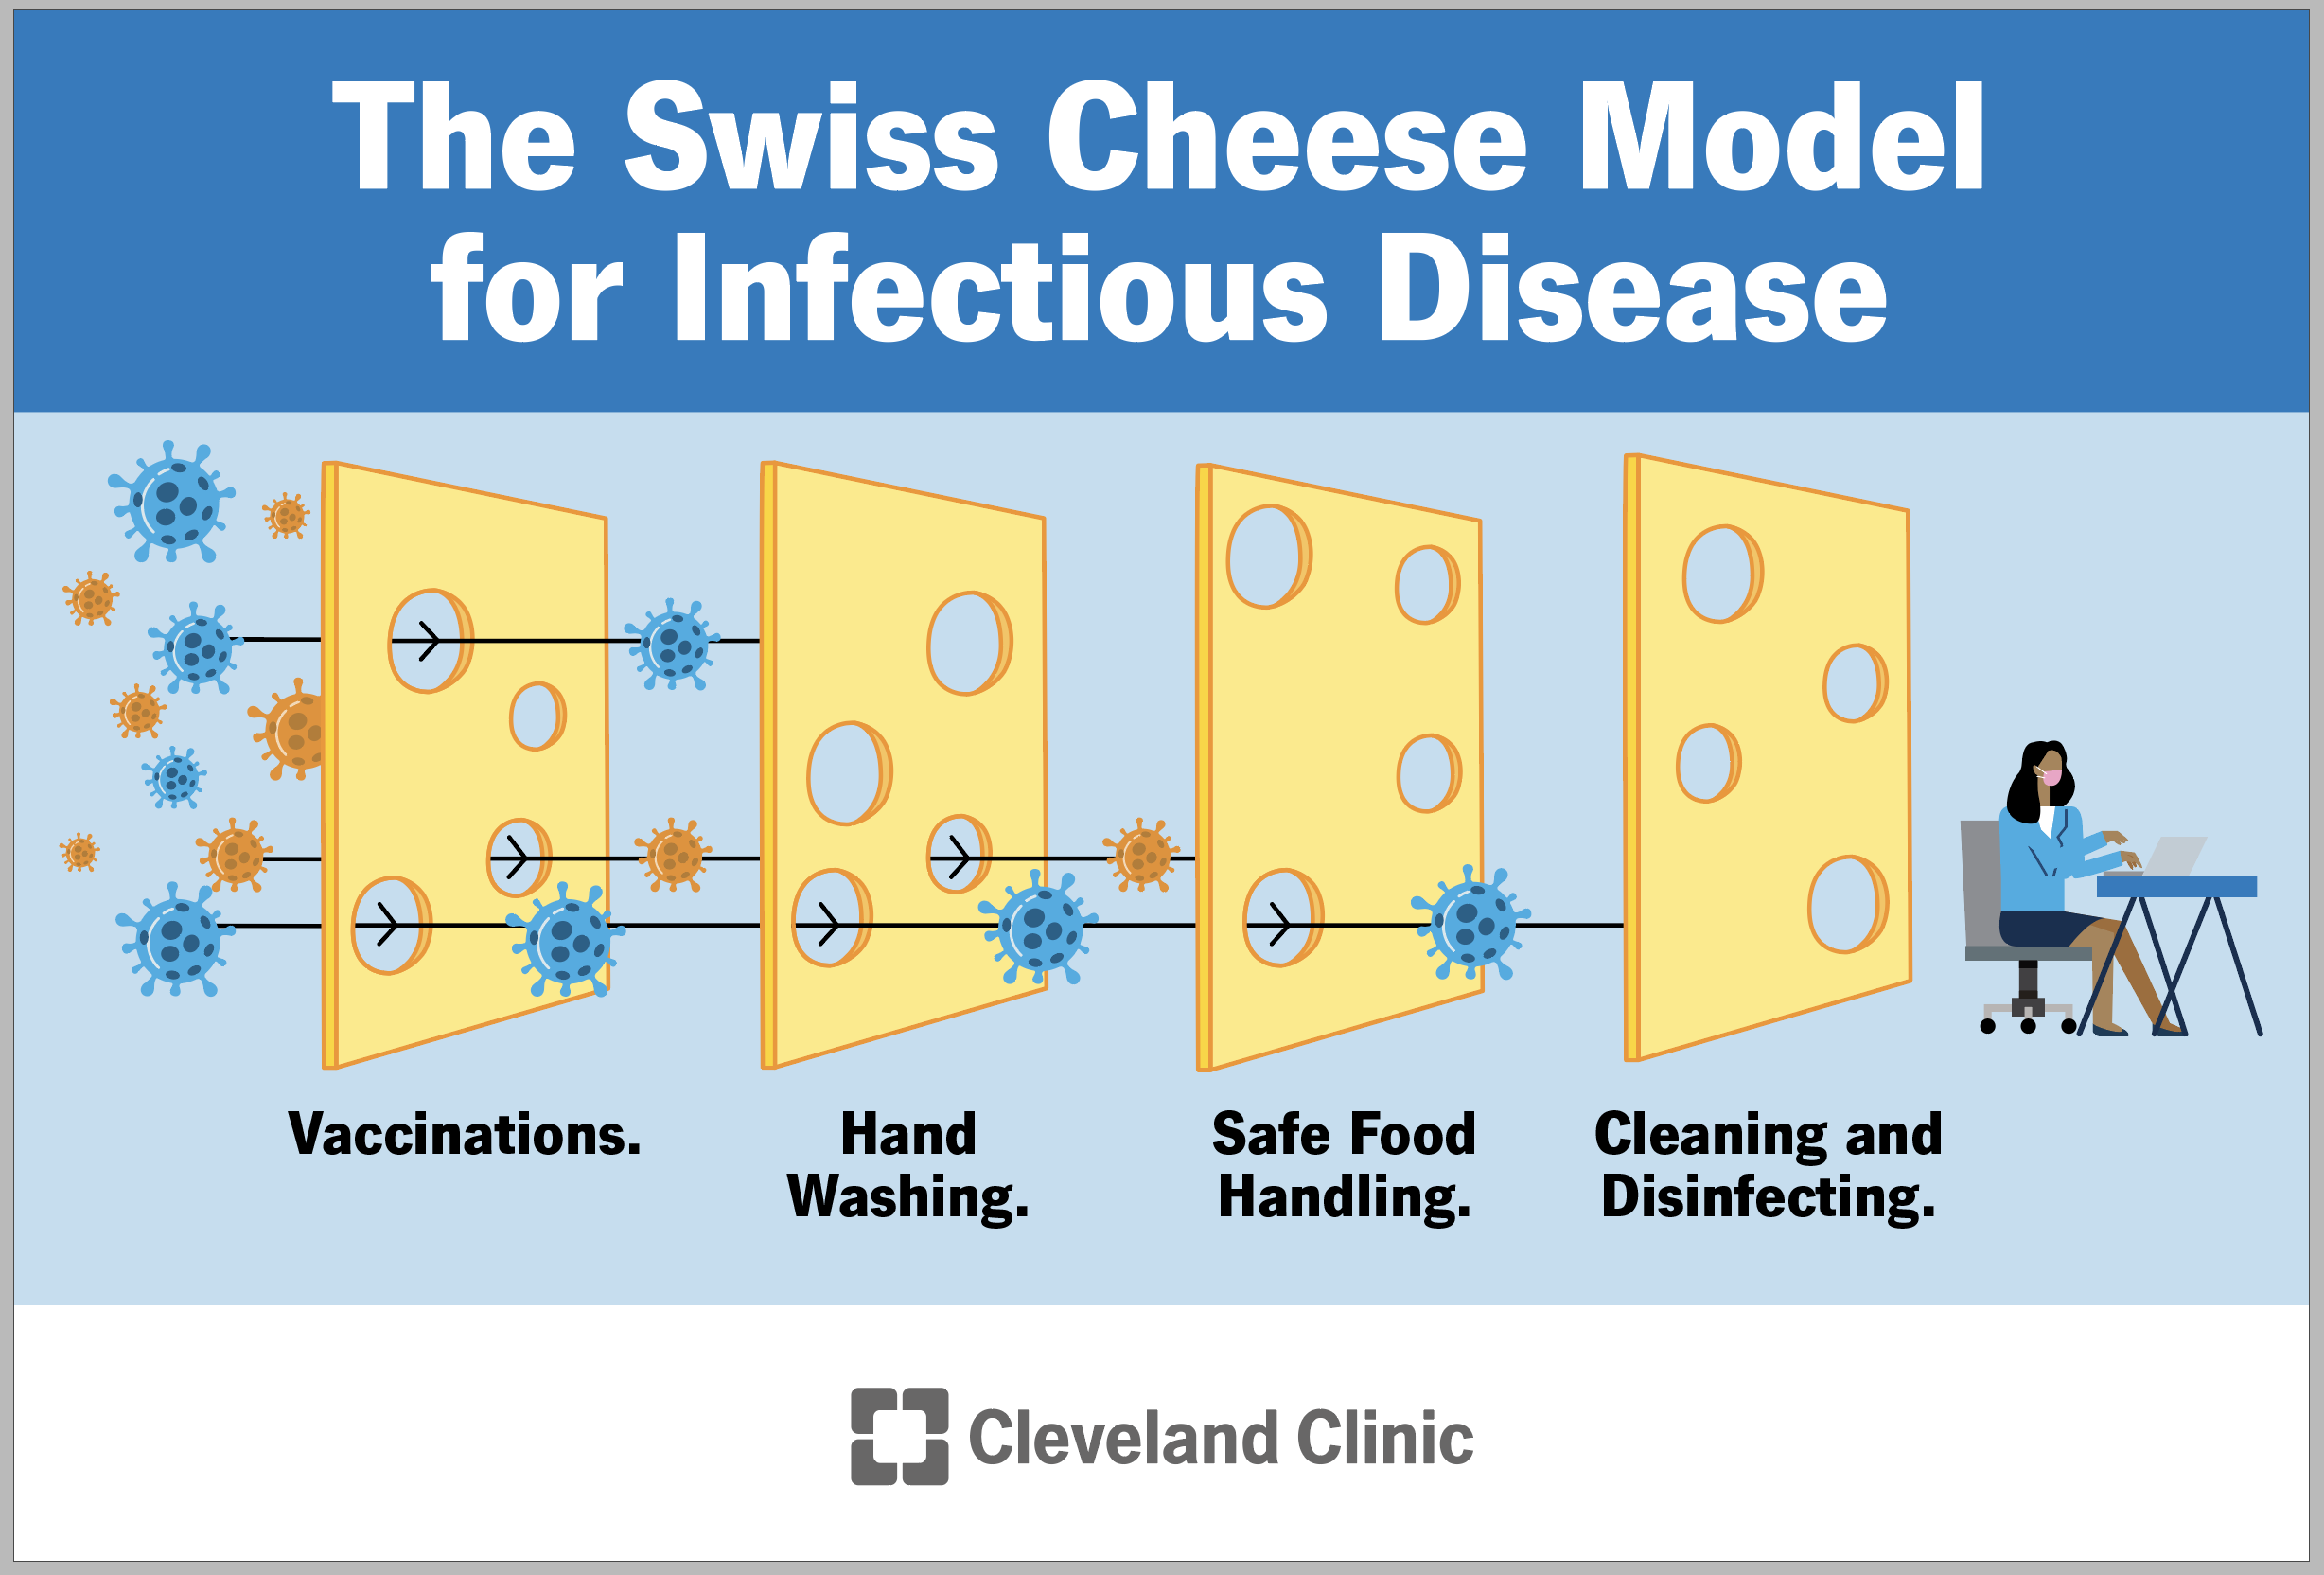 Swiss Cheese Model shows how vaccinations, hand washing, safe food handling and cleaning work together to prevent disease.